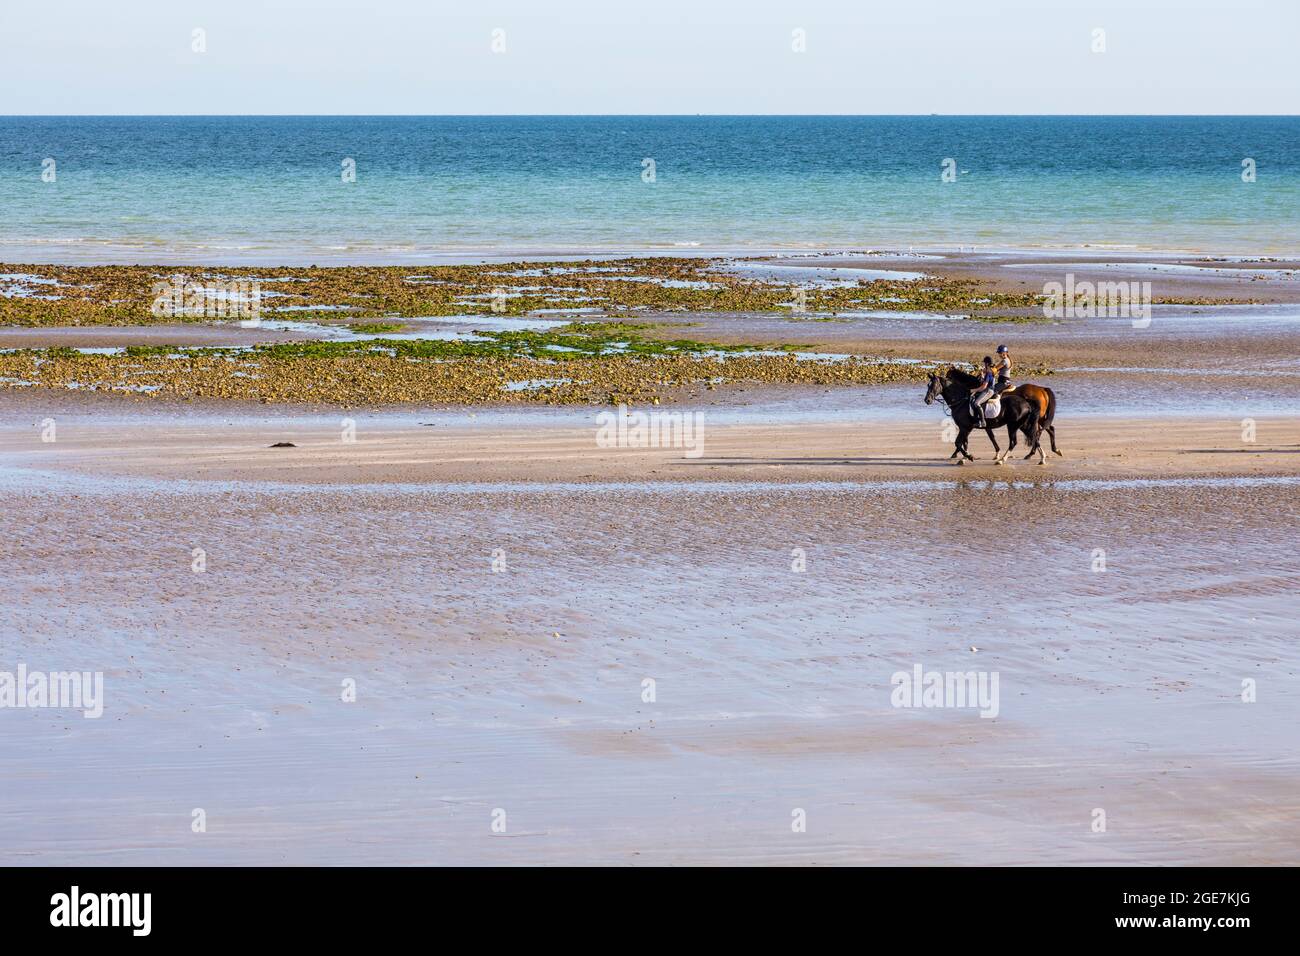 Two horse riders enjoy walking along a deserted beach at low tide at Climping, West Sussex, England. Stock Photo